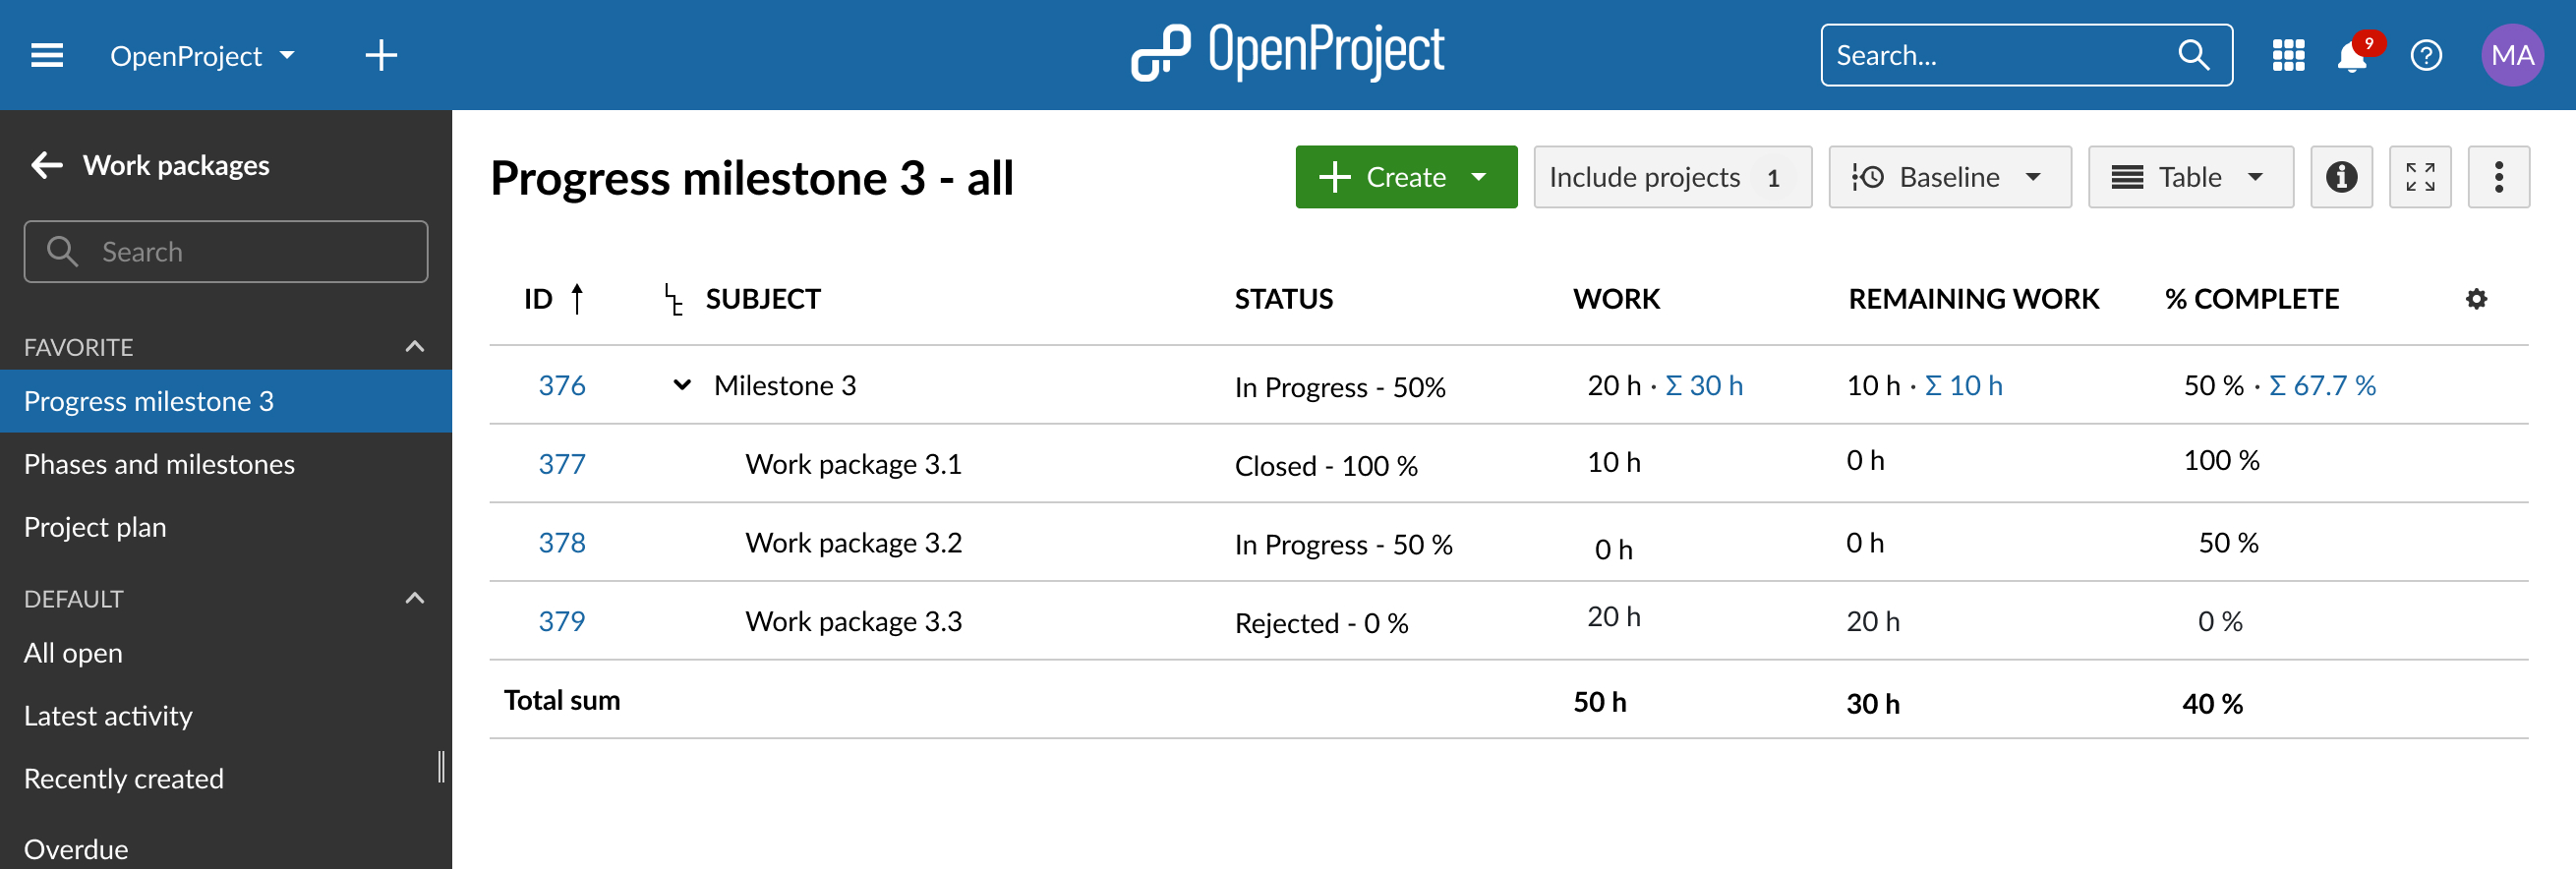 Hierarchy sums are now visible for the Work, Remaining work, % Complete columns